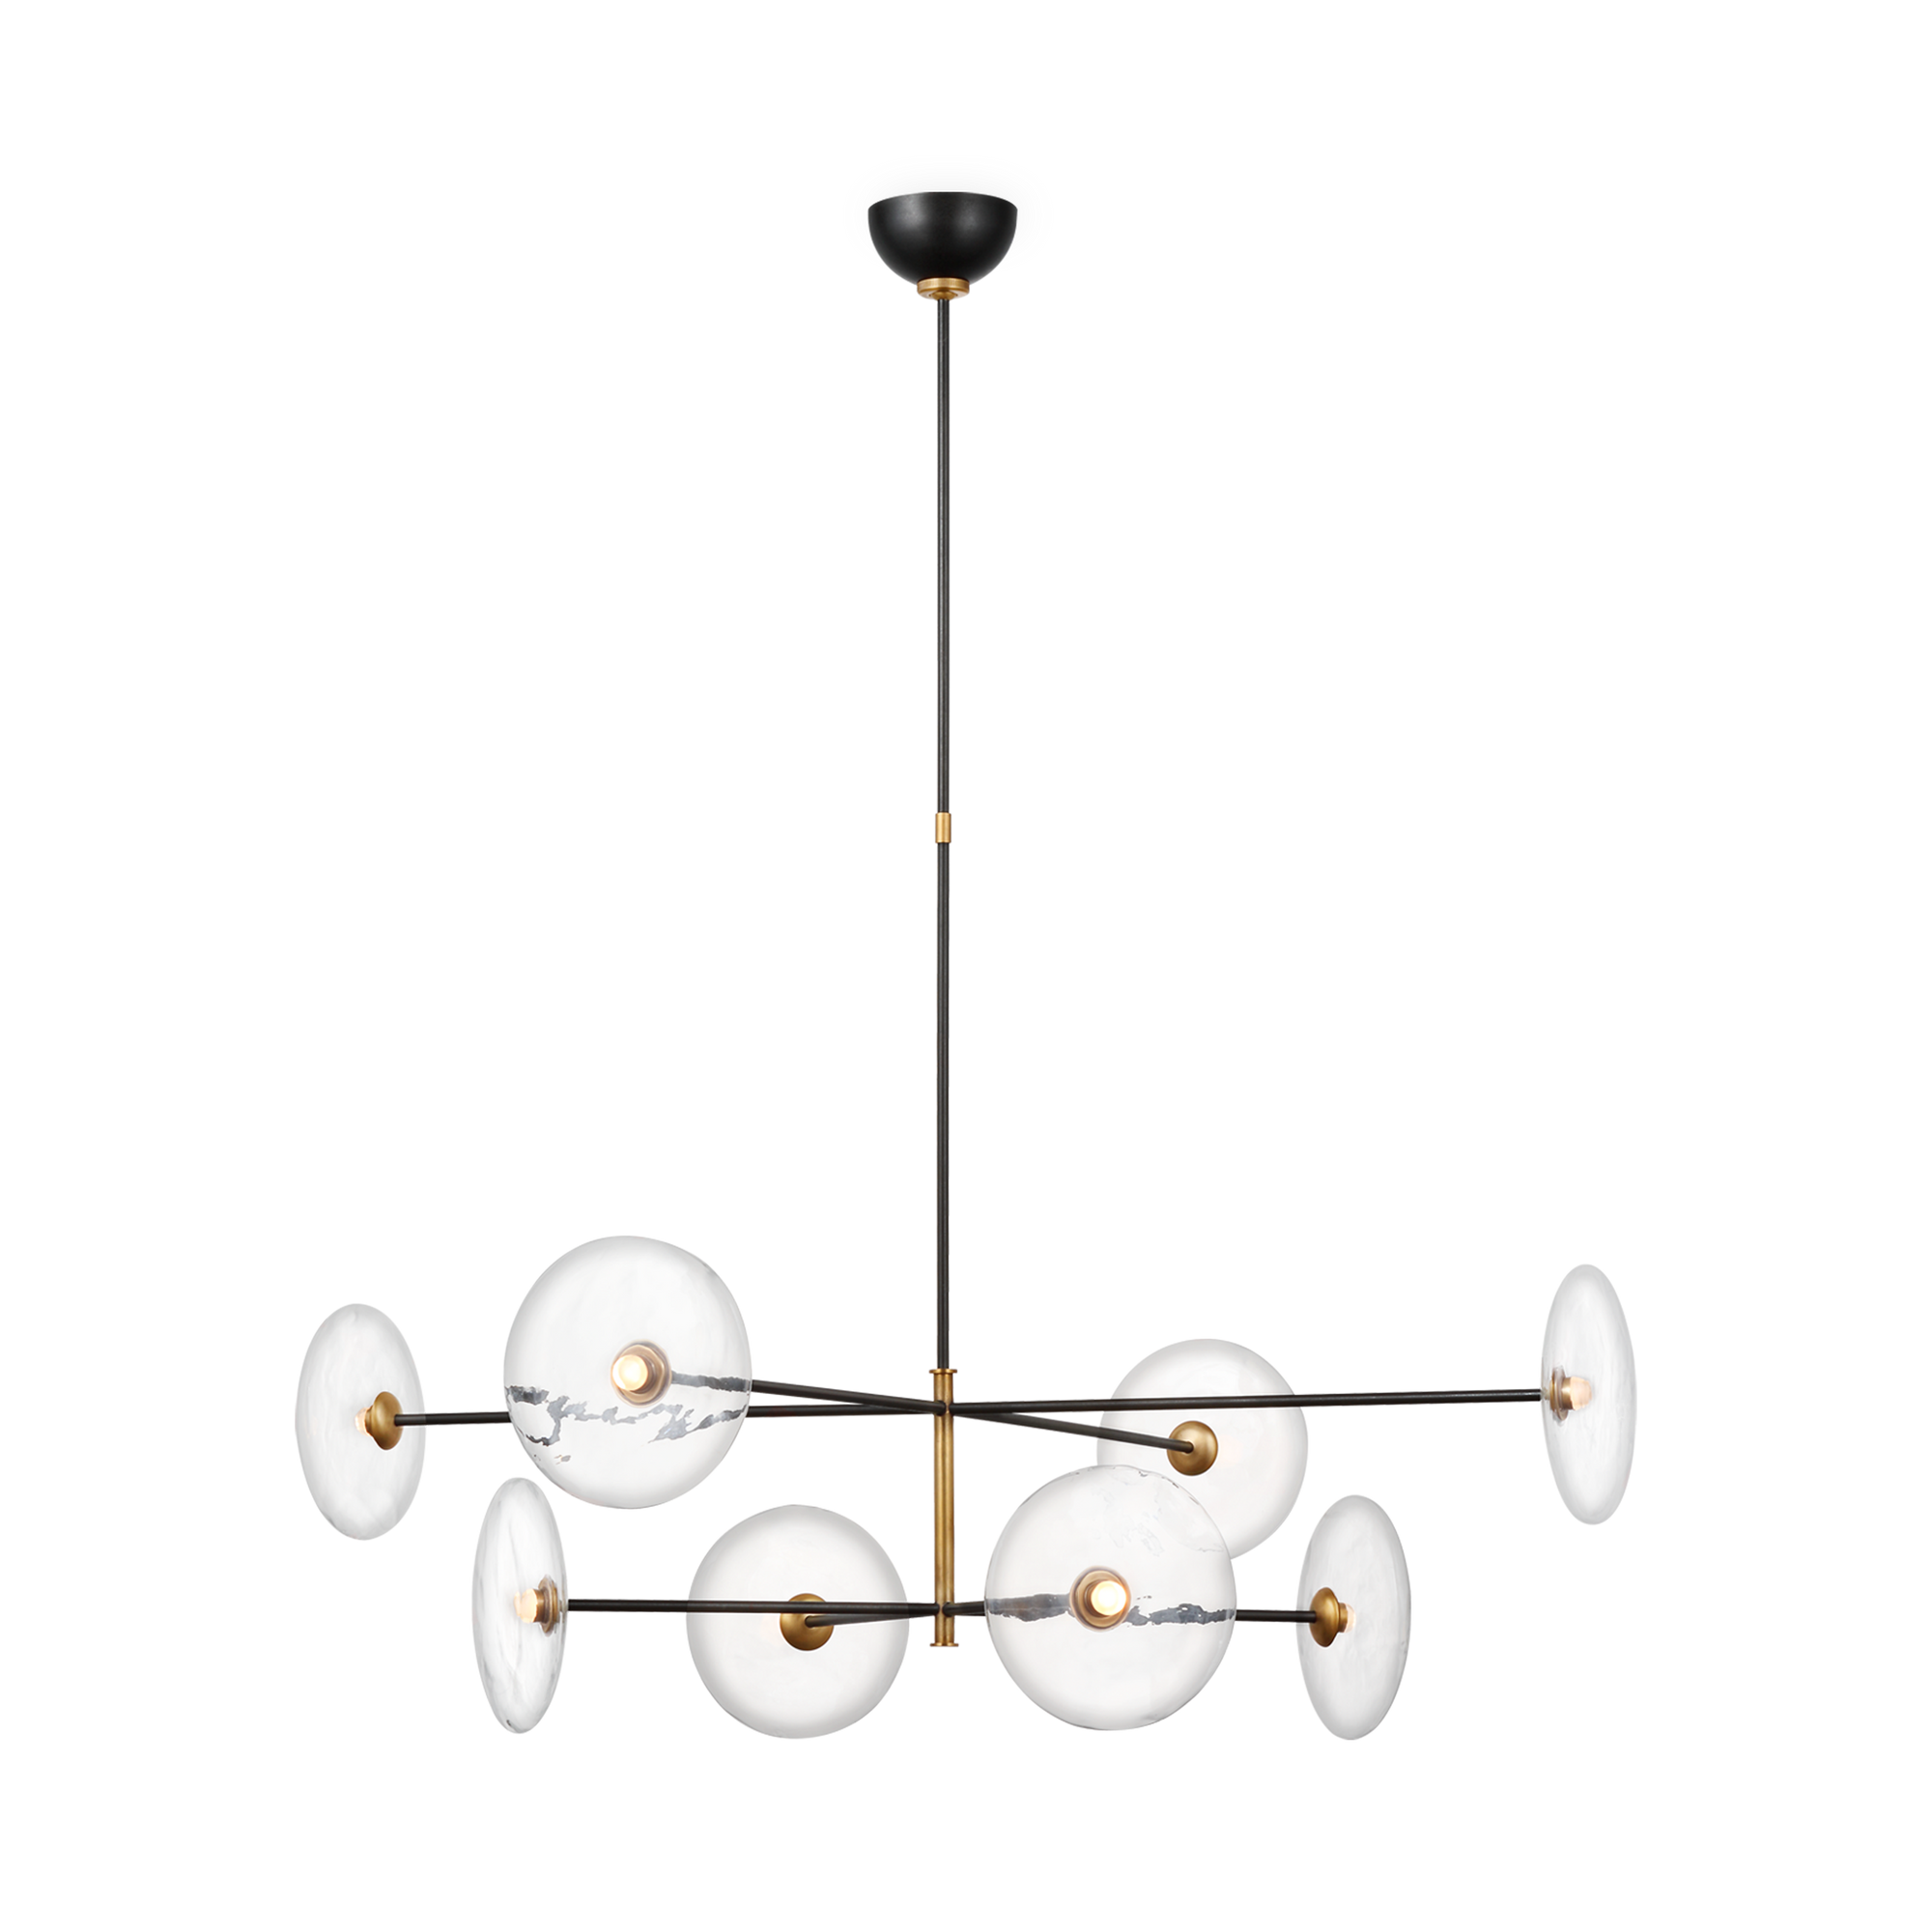 The Calvino XL Chandelier bridges elegance and function, with a modern edge.